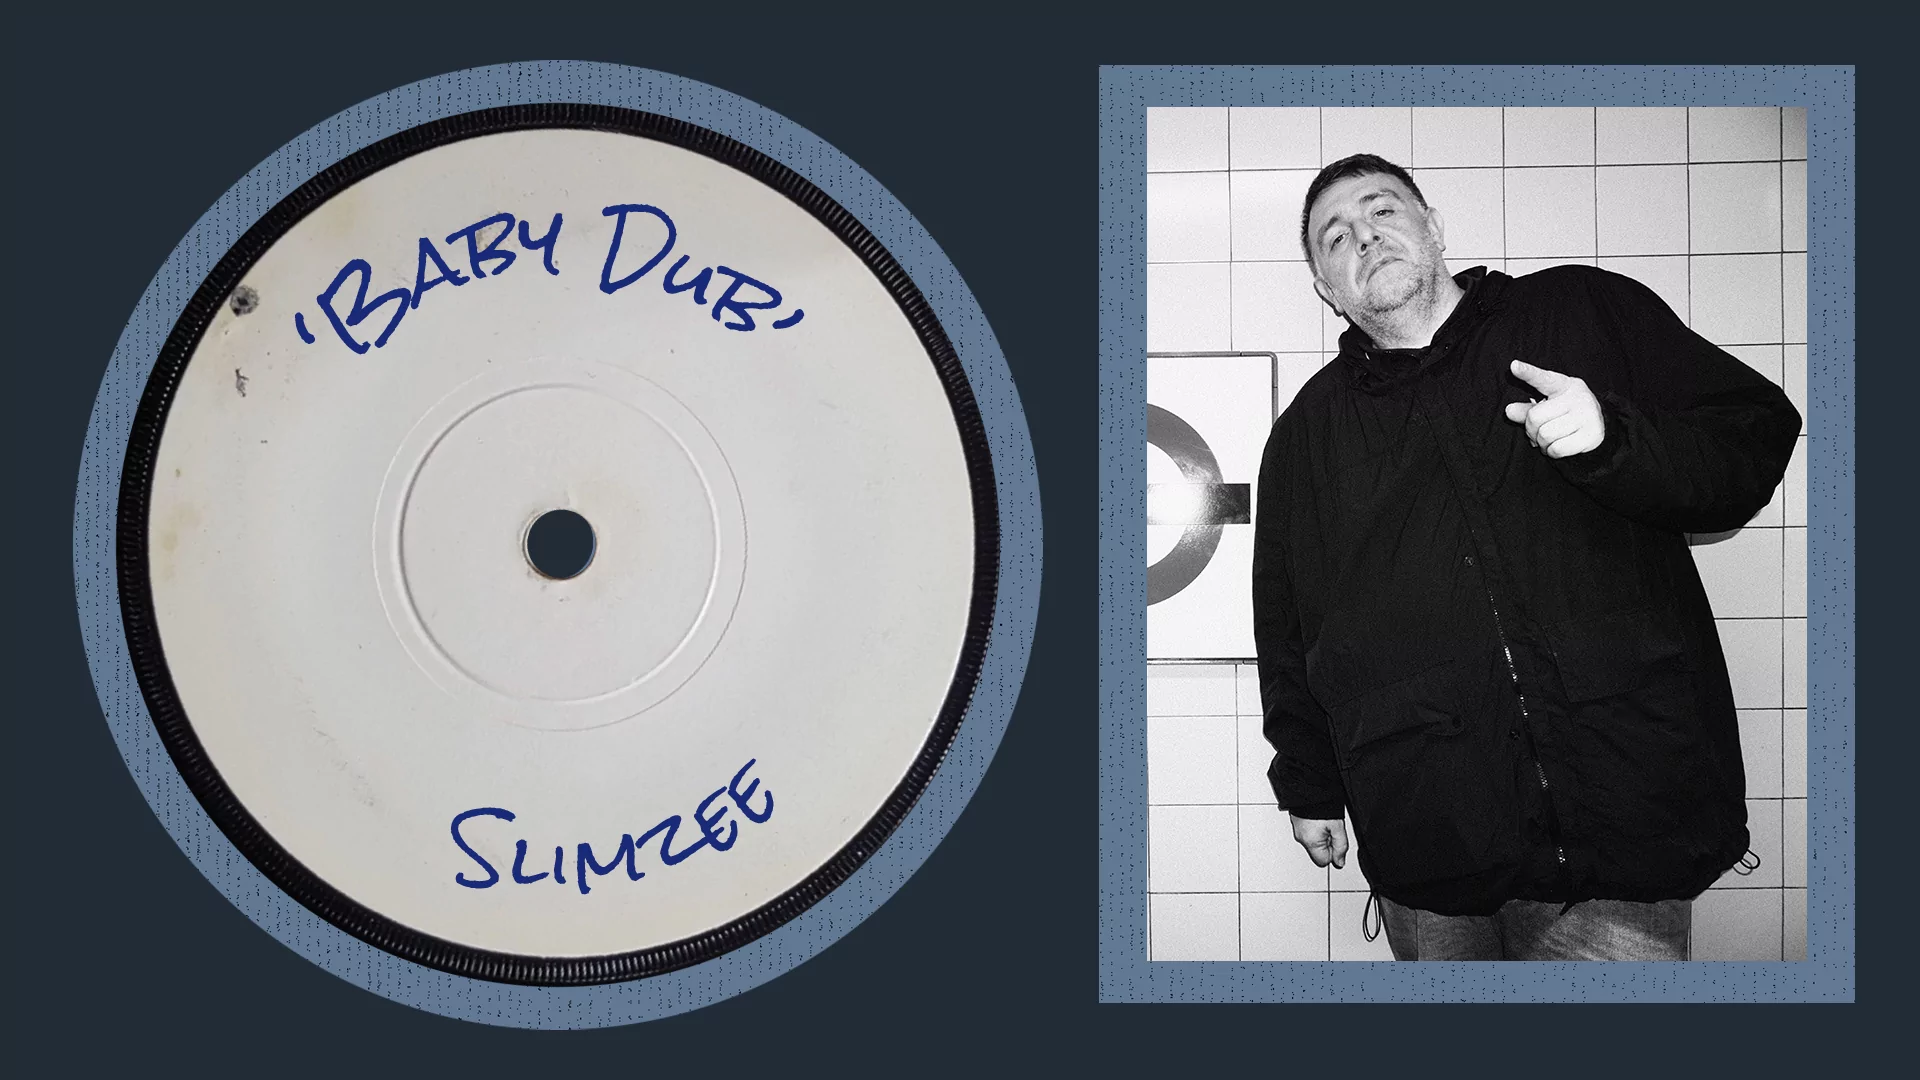 Black-and-white profile image of Slimzee with Slimzee 'Baby Dub' dubplate